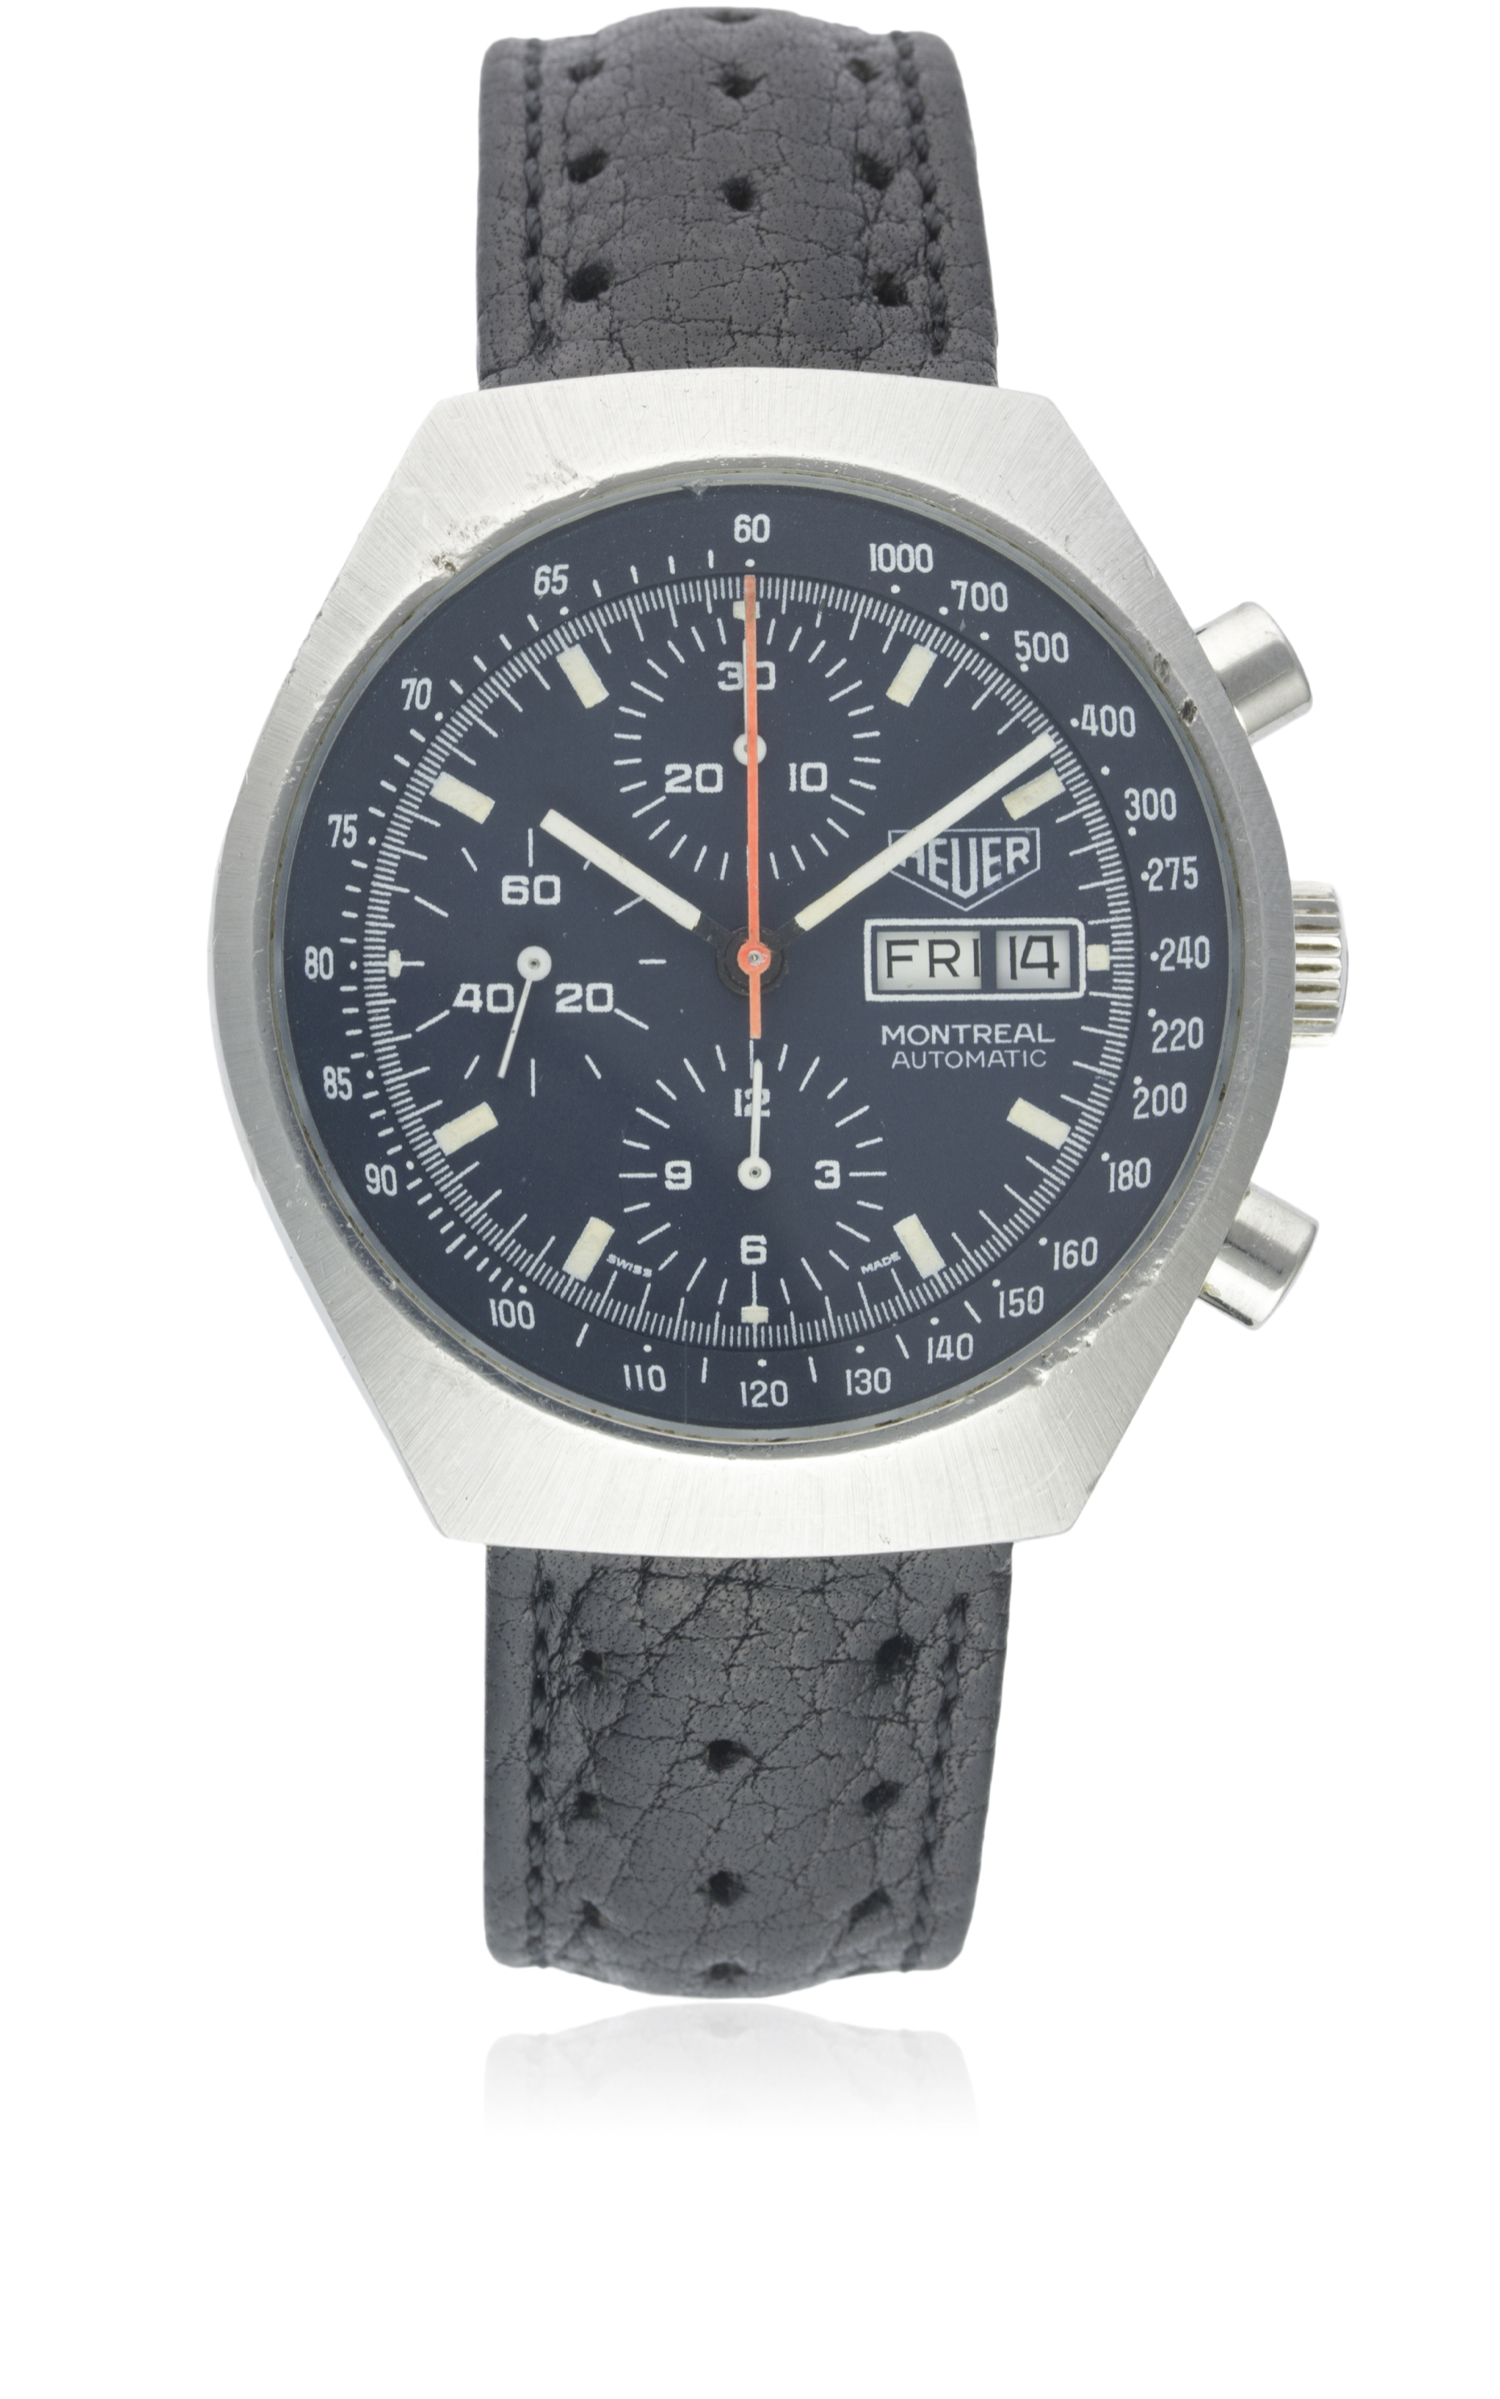 A GENTLEMAN'S STAINLESS STEEL HEUER MONTREAL AUTOMATIC CHRONOGRAPH WRIST WATCH CIRCA 1970s, REF.